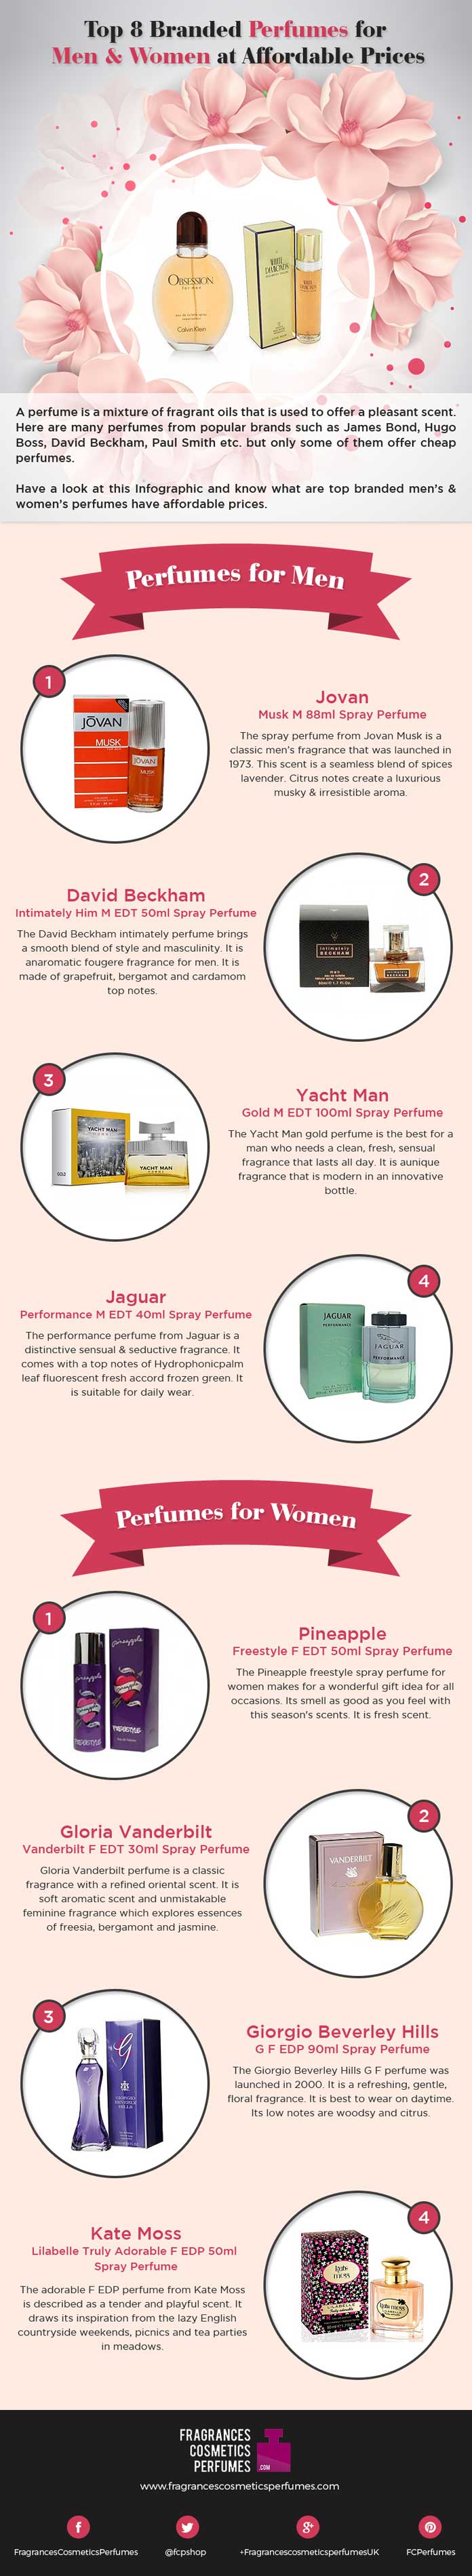 Top-8-Branded-Perfumes-for-Men-&-Women-at-Affordable-Prices